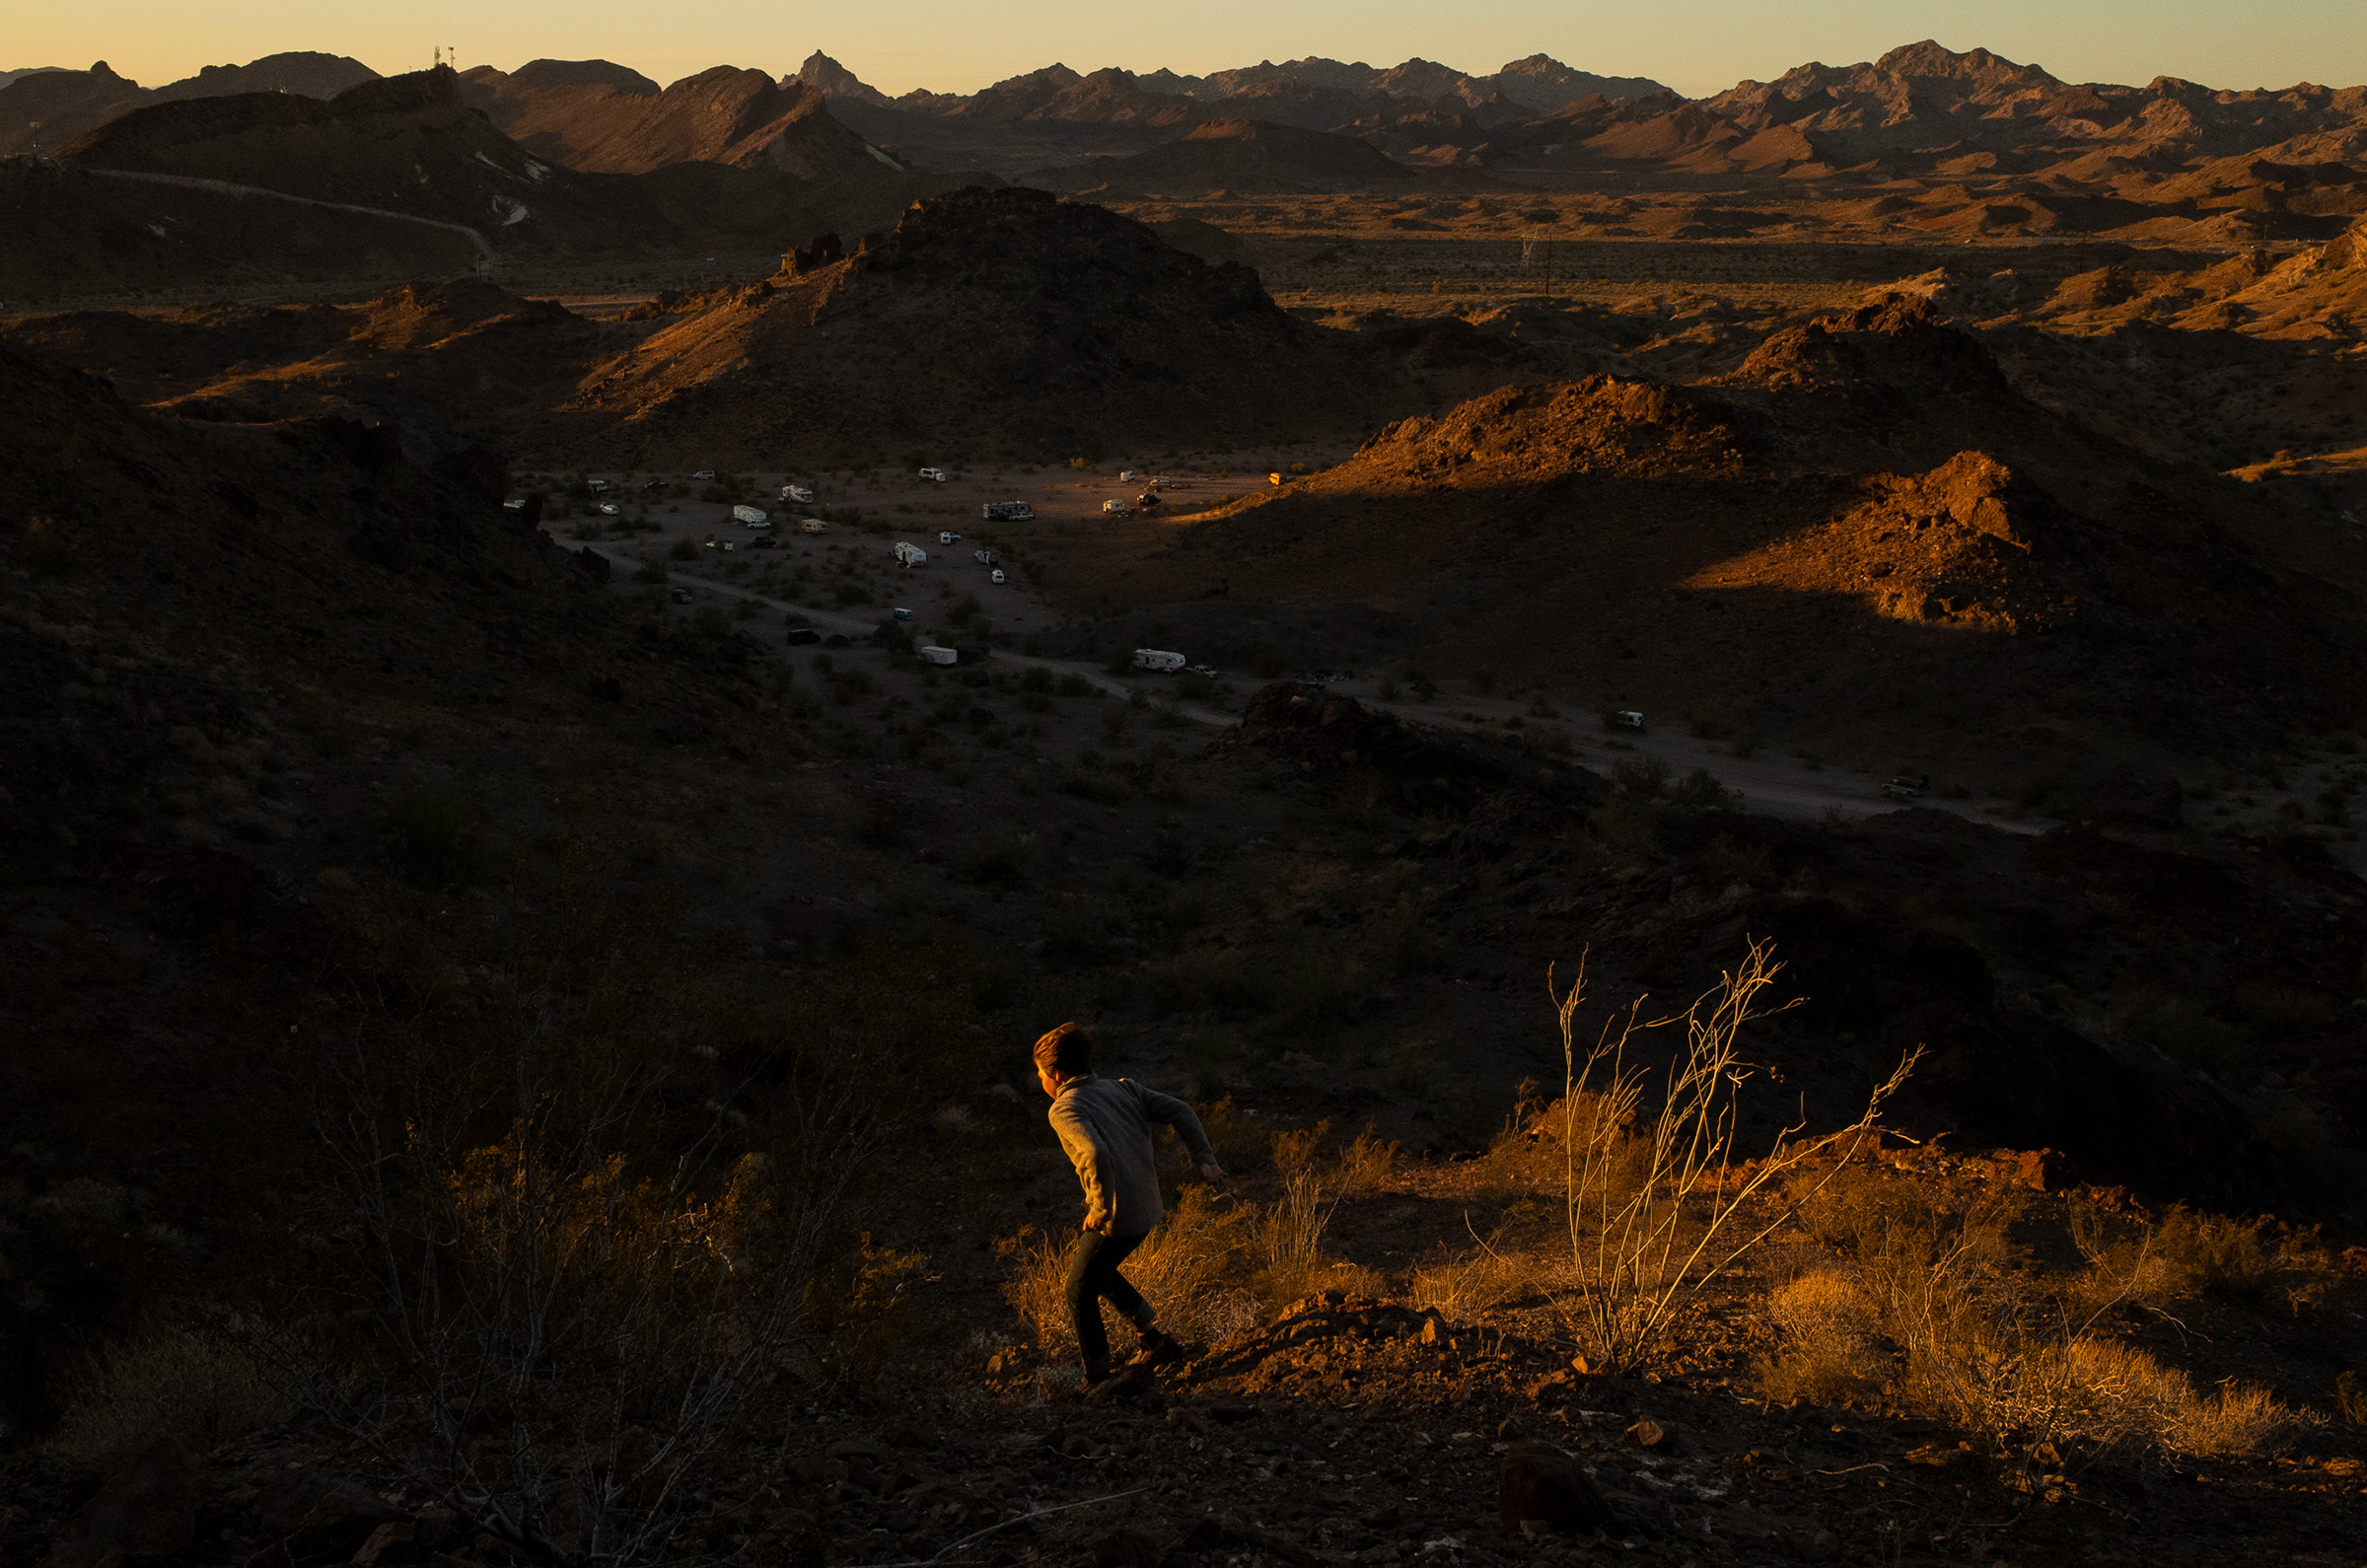 Max hikes above <a href="https://time.com/5950945/life-in-a-mobile-home/">Craggy Wash Campground</a> outside Lake Havasu City, Az. on Feb. 25. (Nina Riggio for TIME)